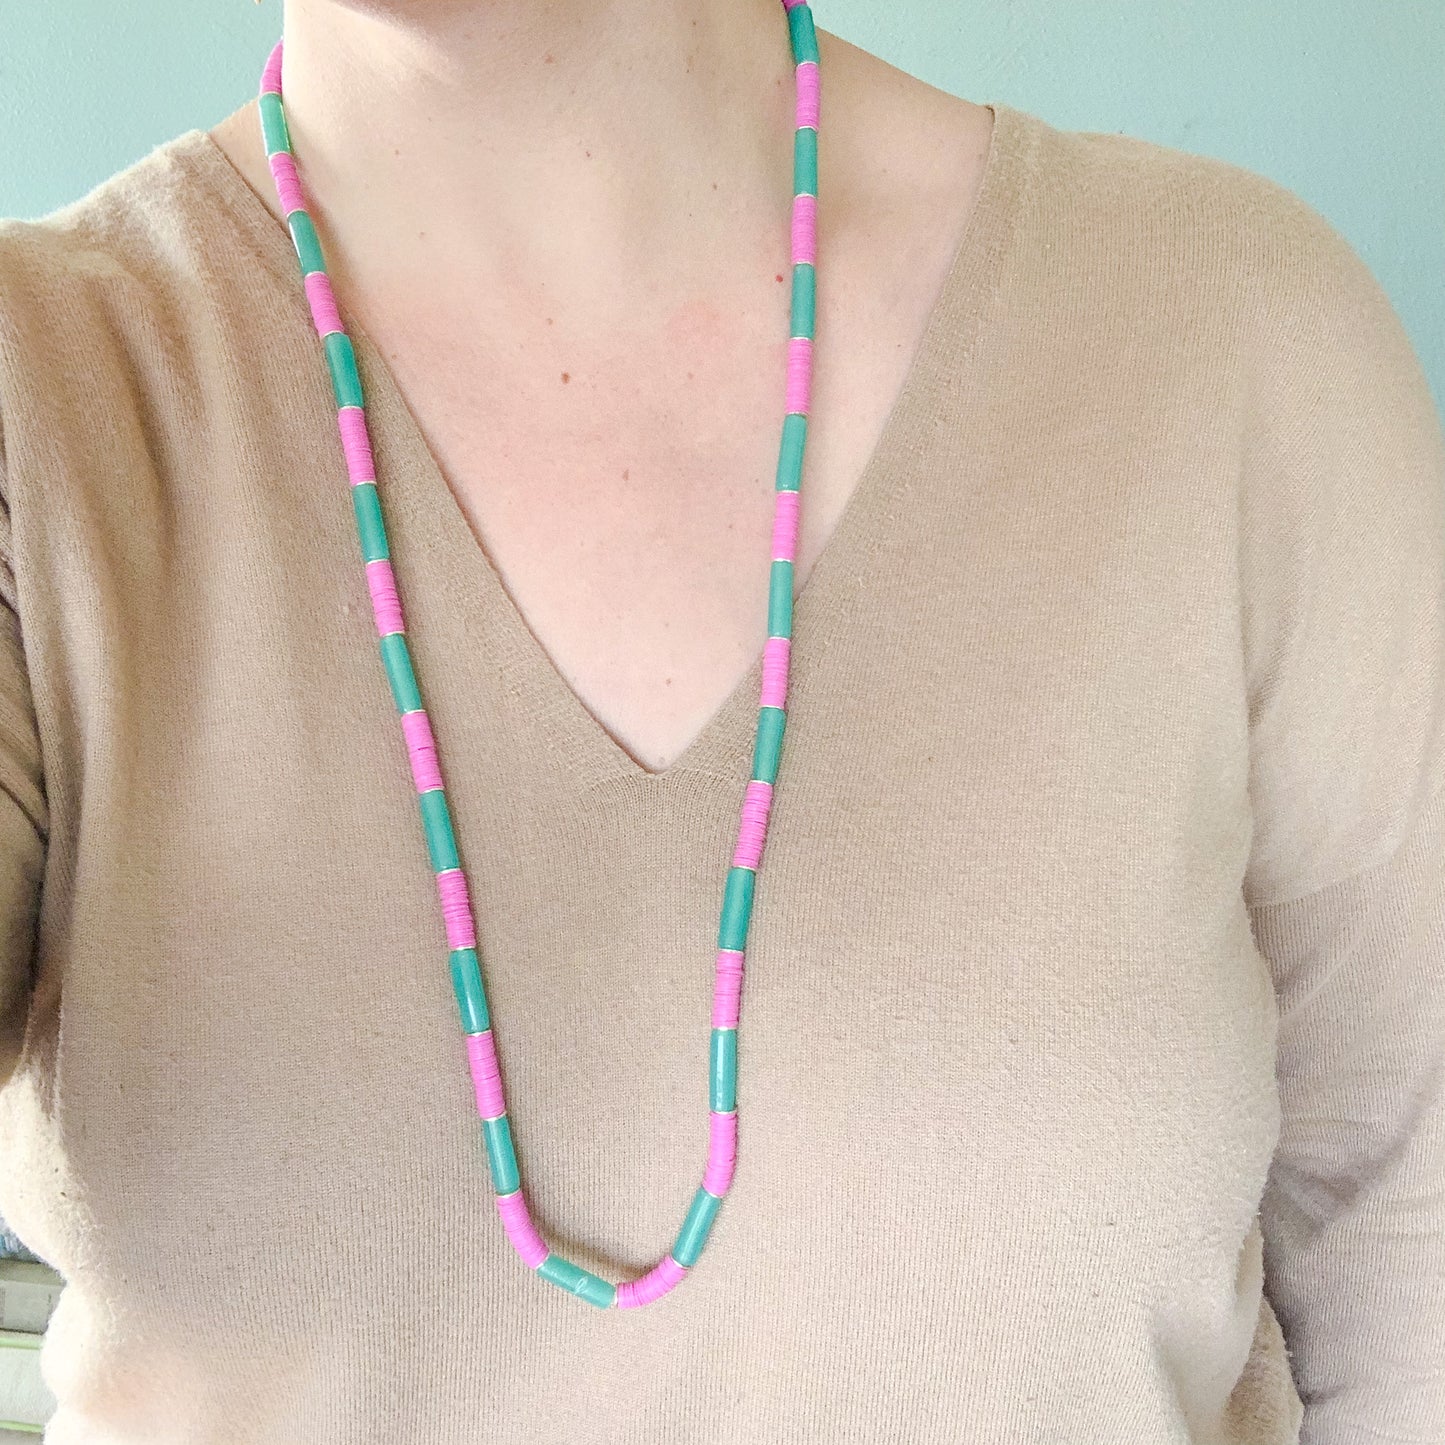 Checkered Layers: Orchid and Mint Long Statement Necklaces